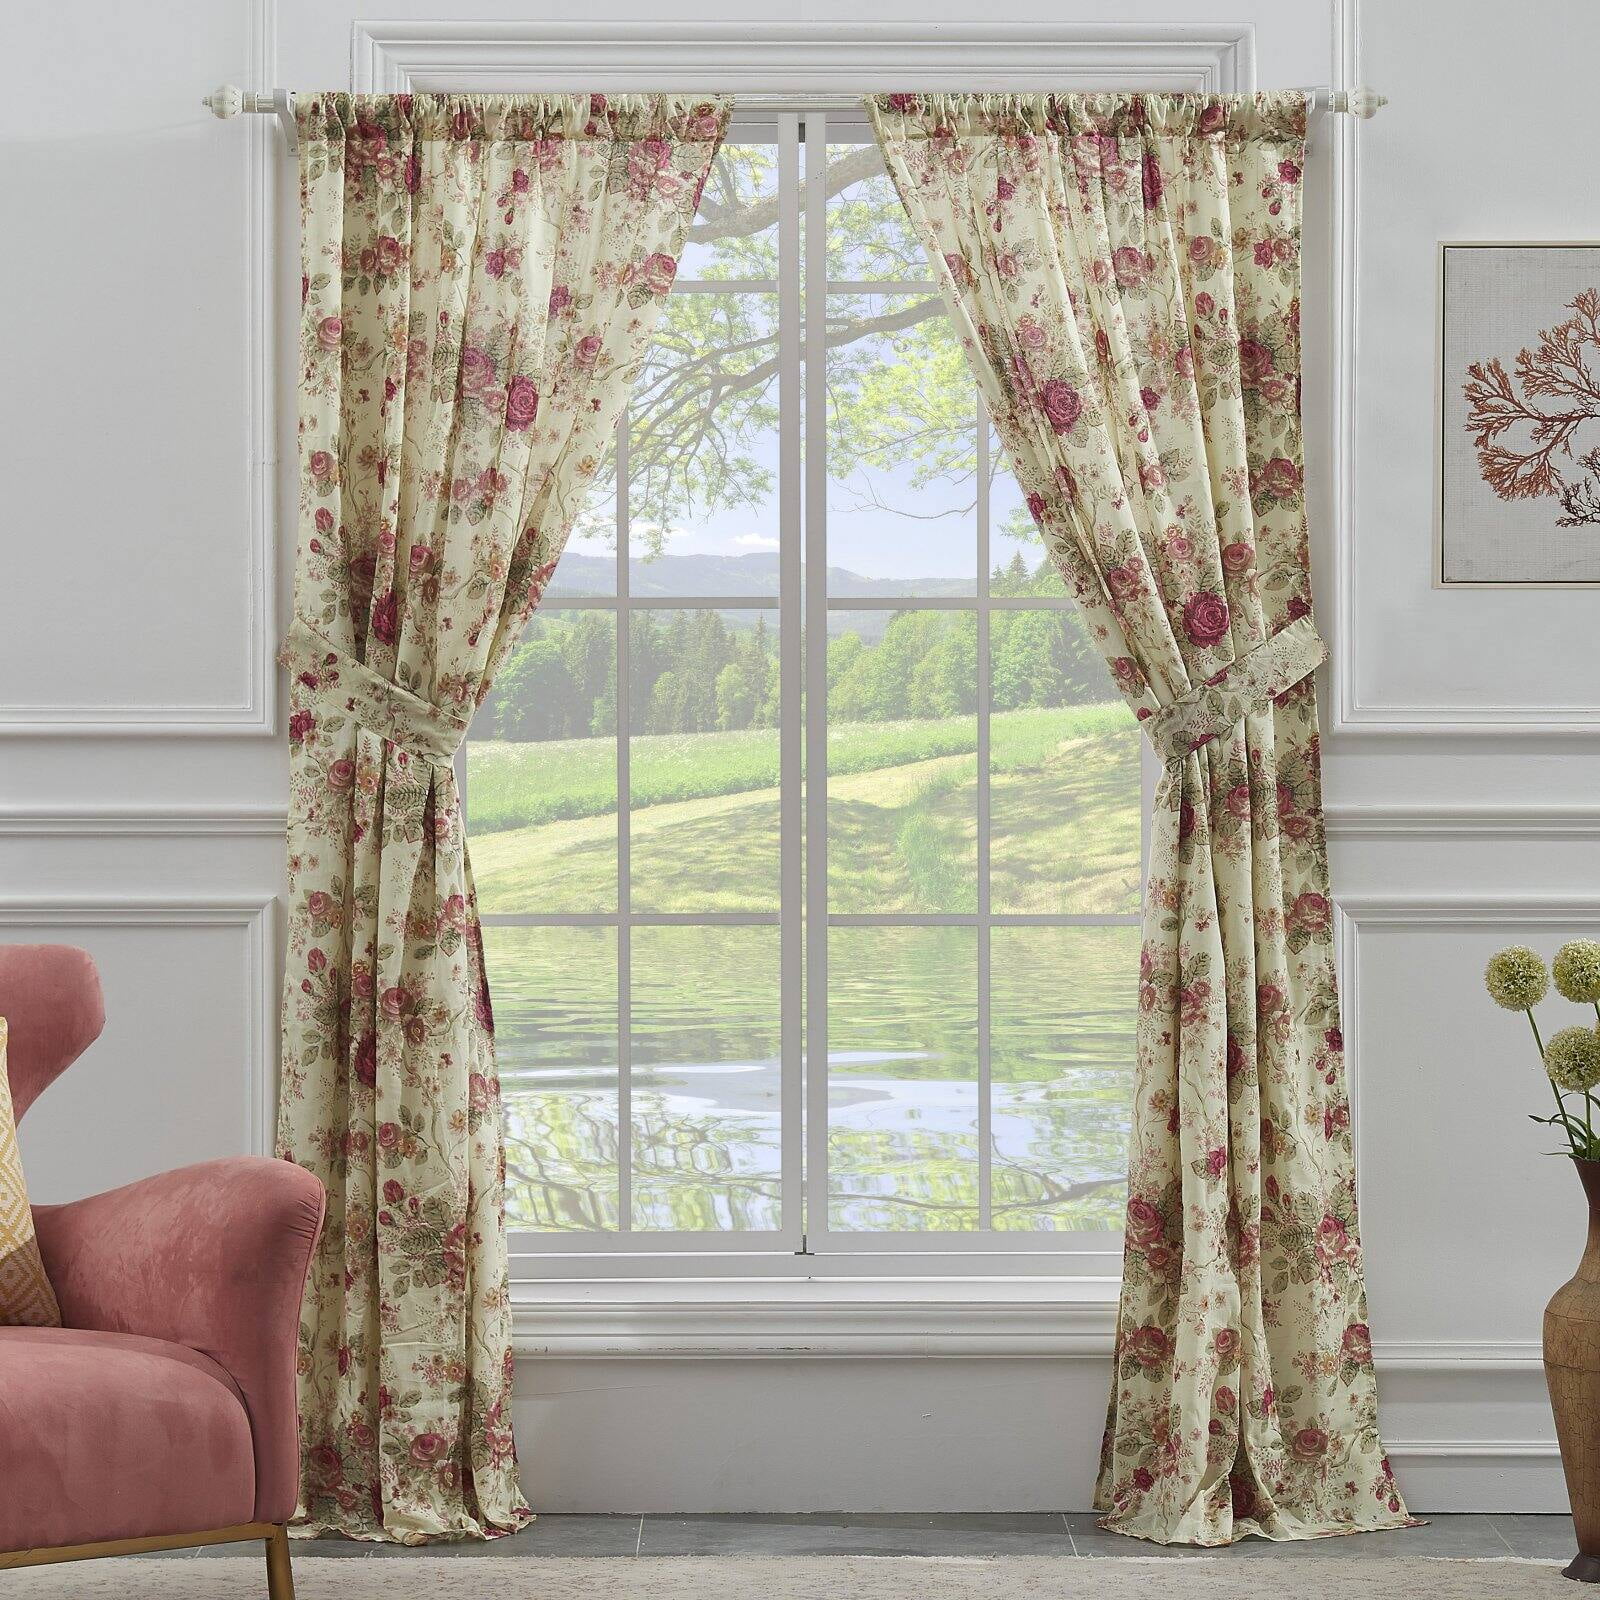 Household Window Curtain Drapes Panel Valance Shade Floral Pattern Curtains D 